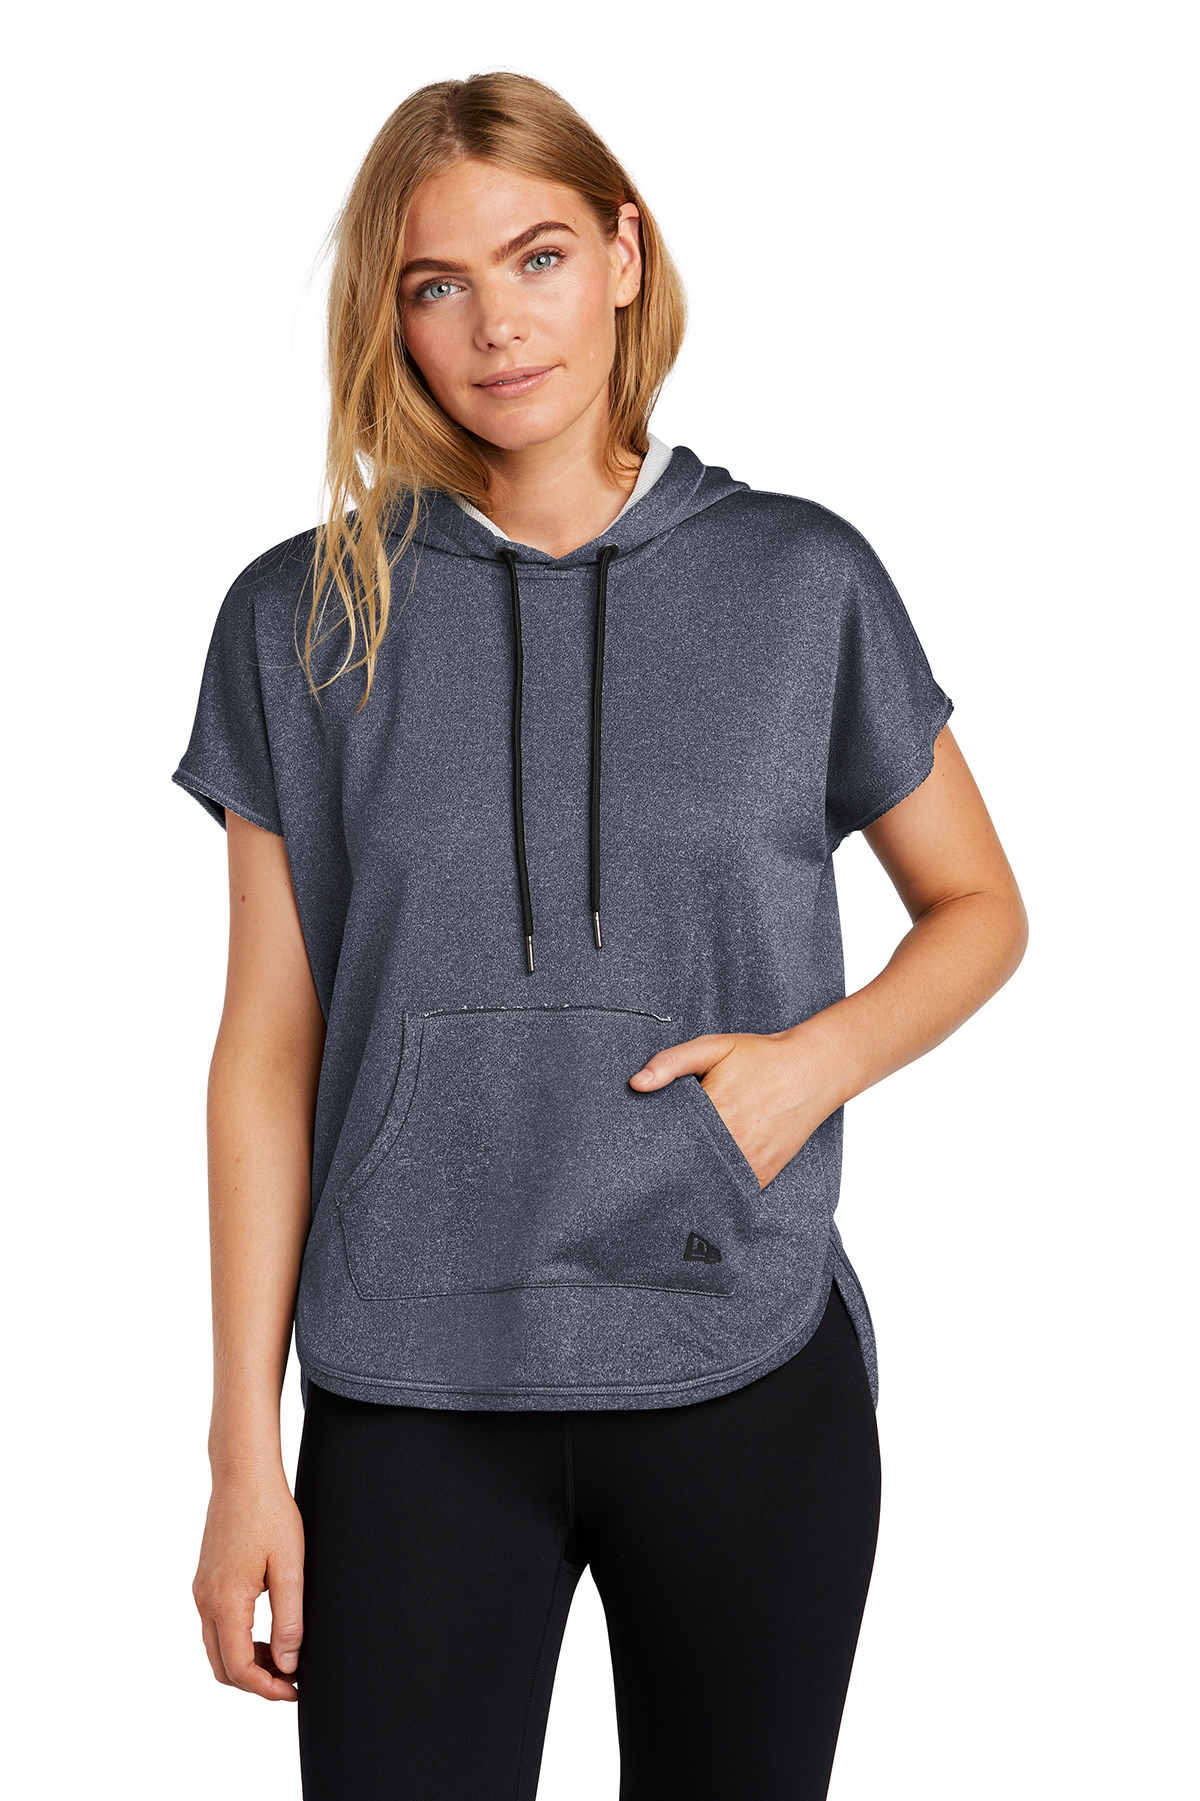 Avia Lined Athletic Sweatshirts for Women